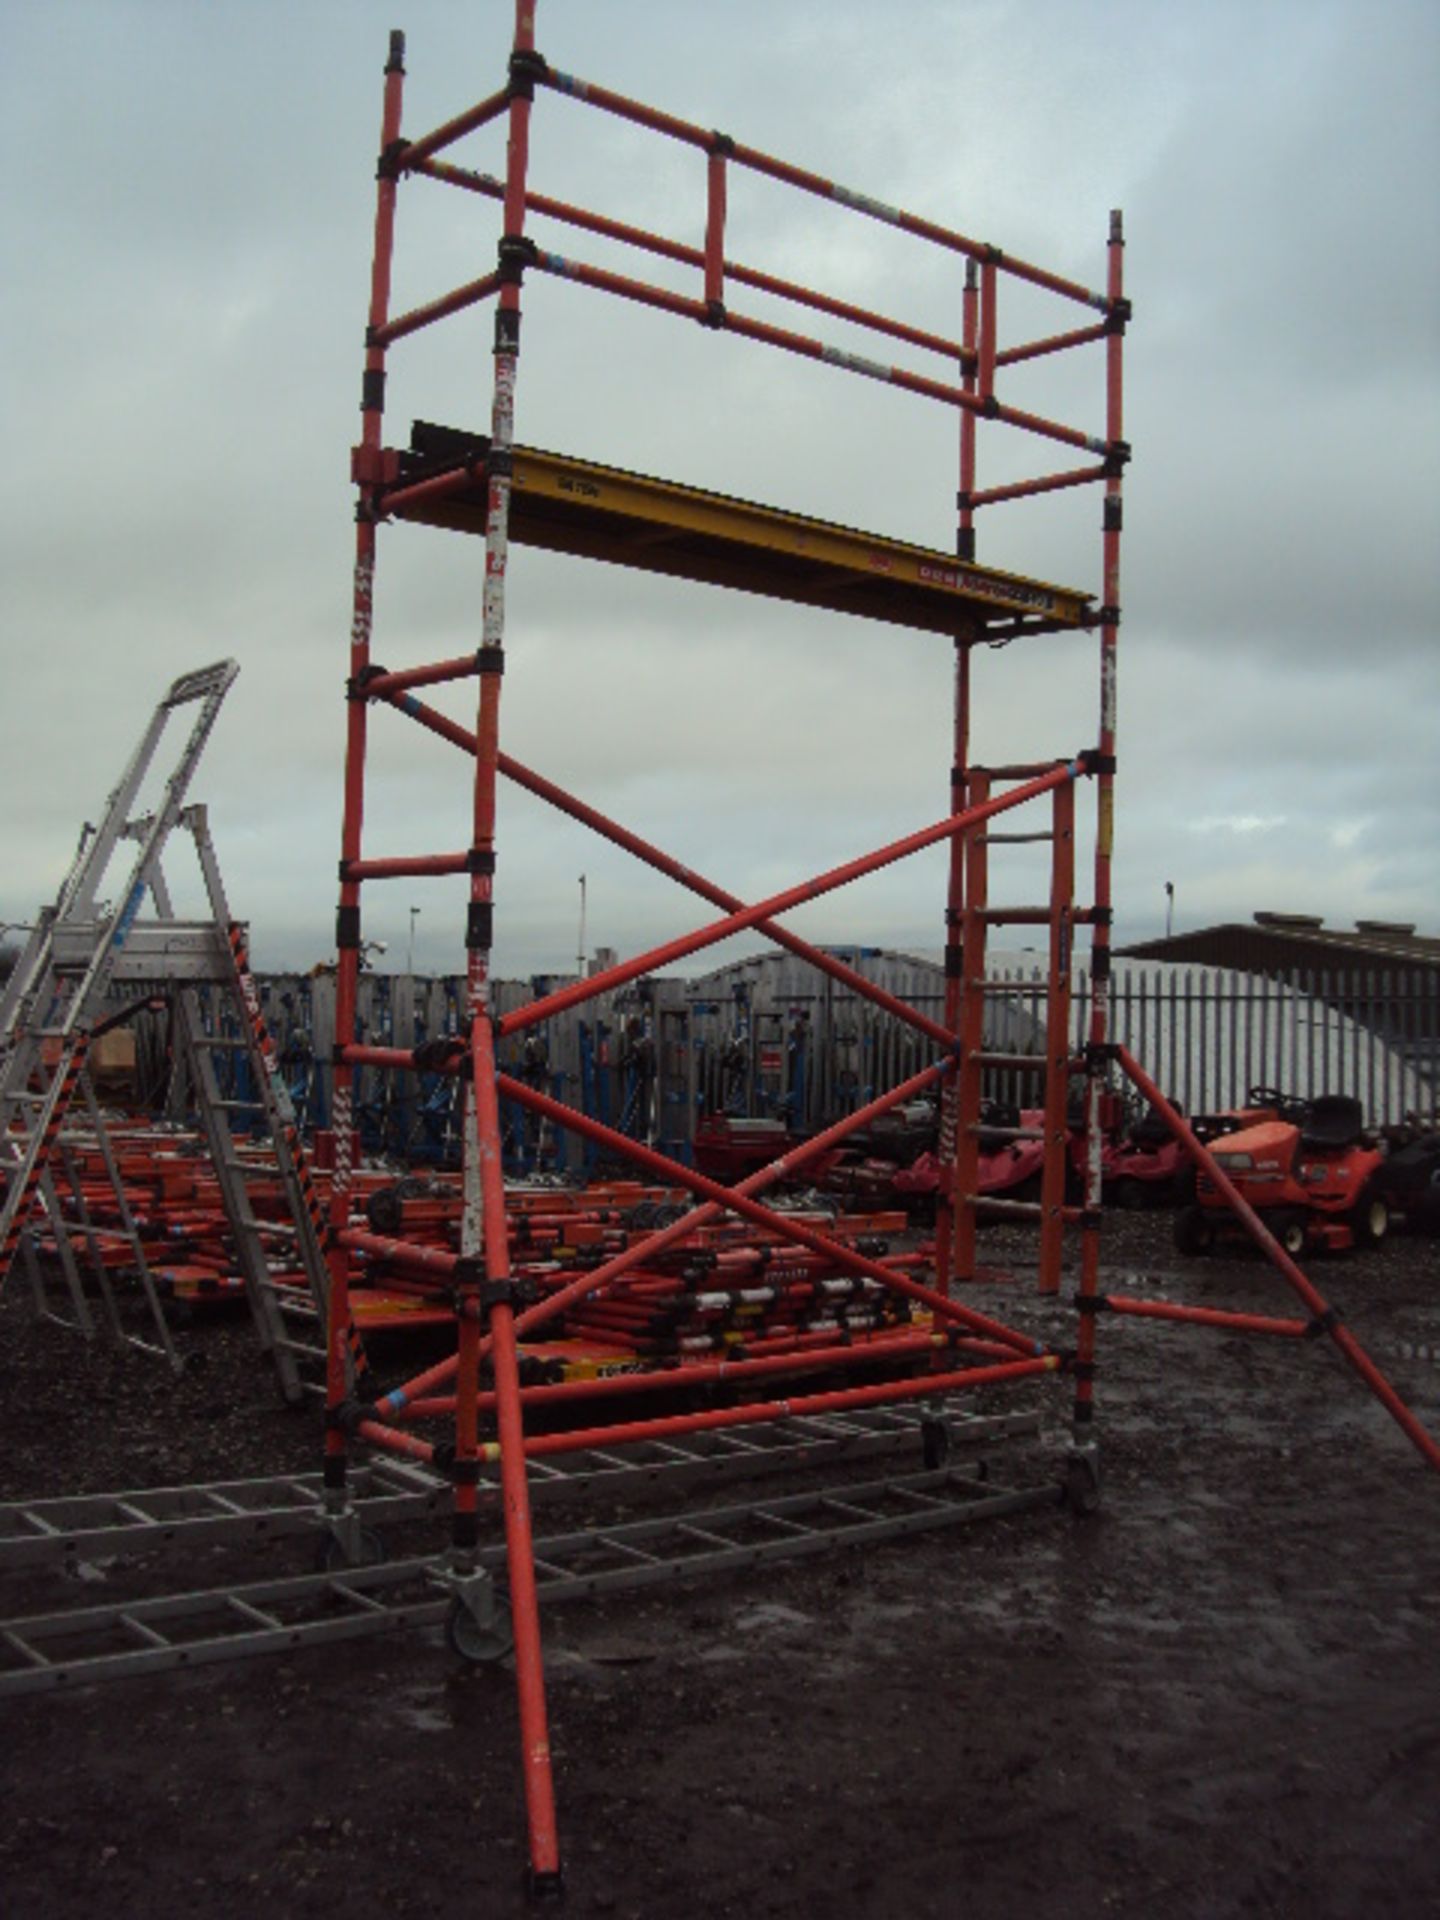 CLOW Advanced Scaffold 4m mobile fibreglass scaffold tower. Comprising uprights, bracing bars, - Image 2 of 2